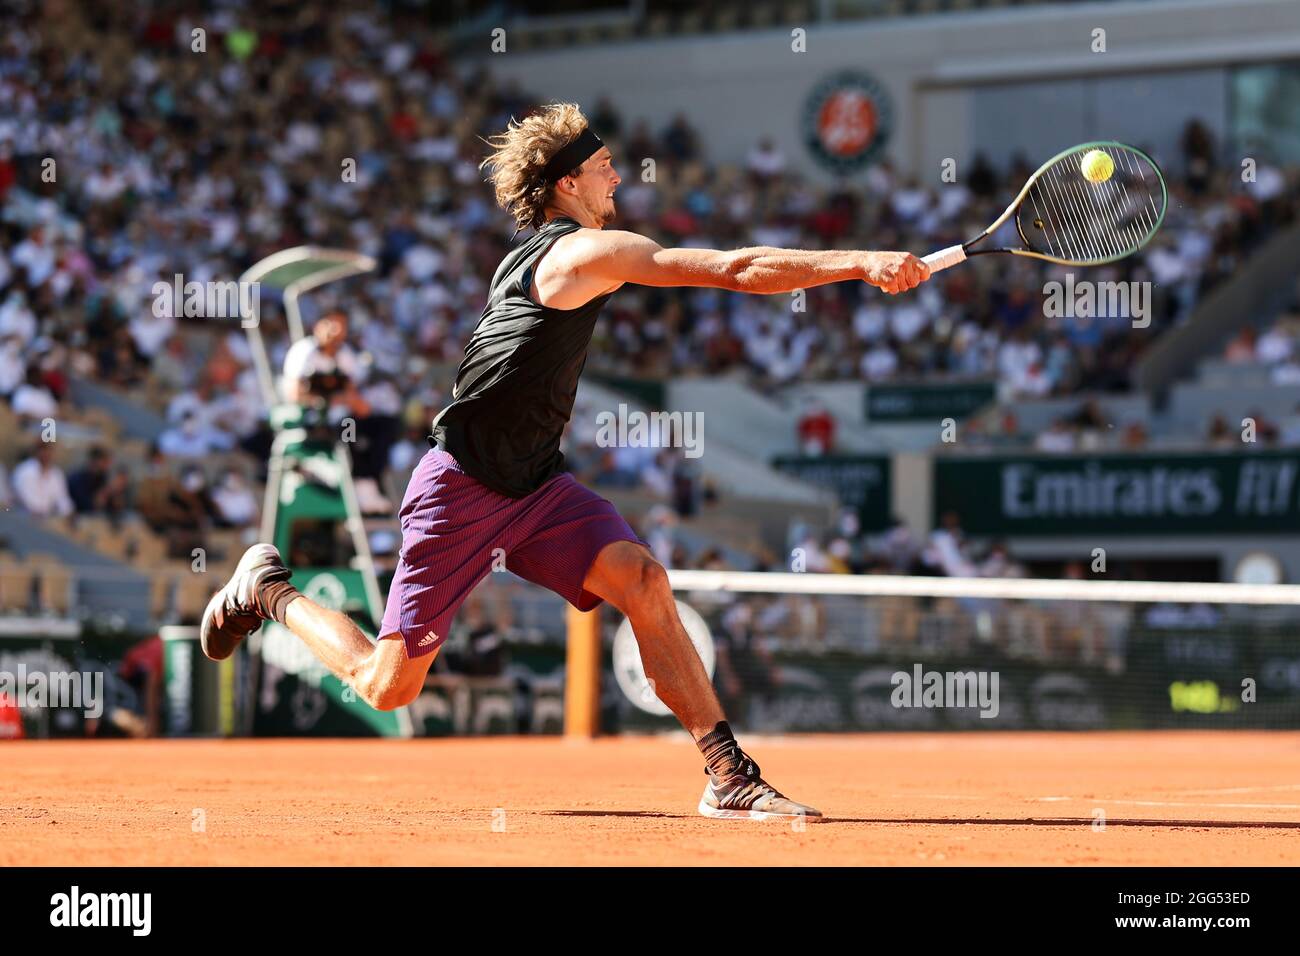 German tennis player Alexander Zverev playing forehand shot in French Open 2021 tennis tournament, Paris, France Stock Photo